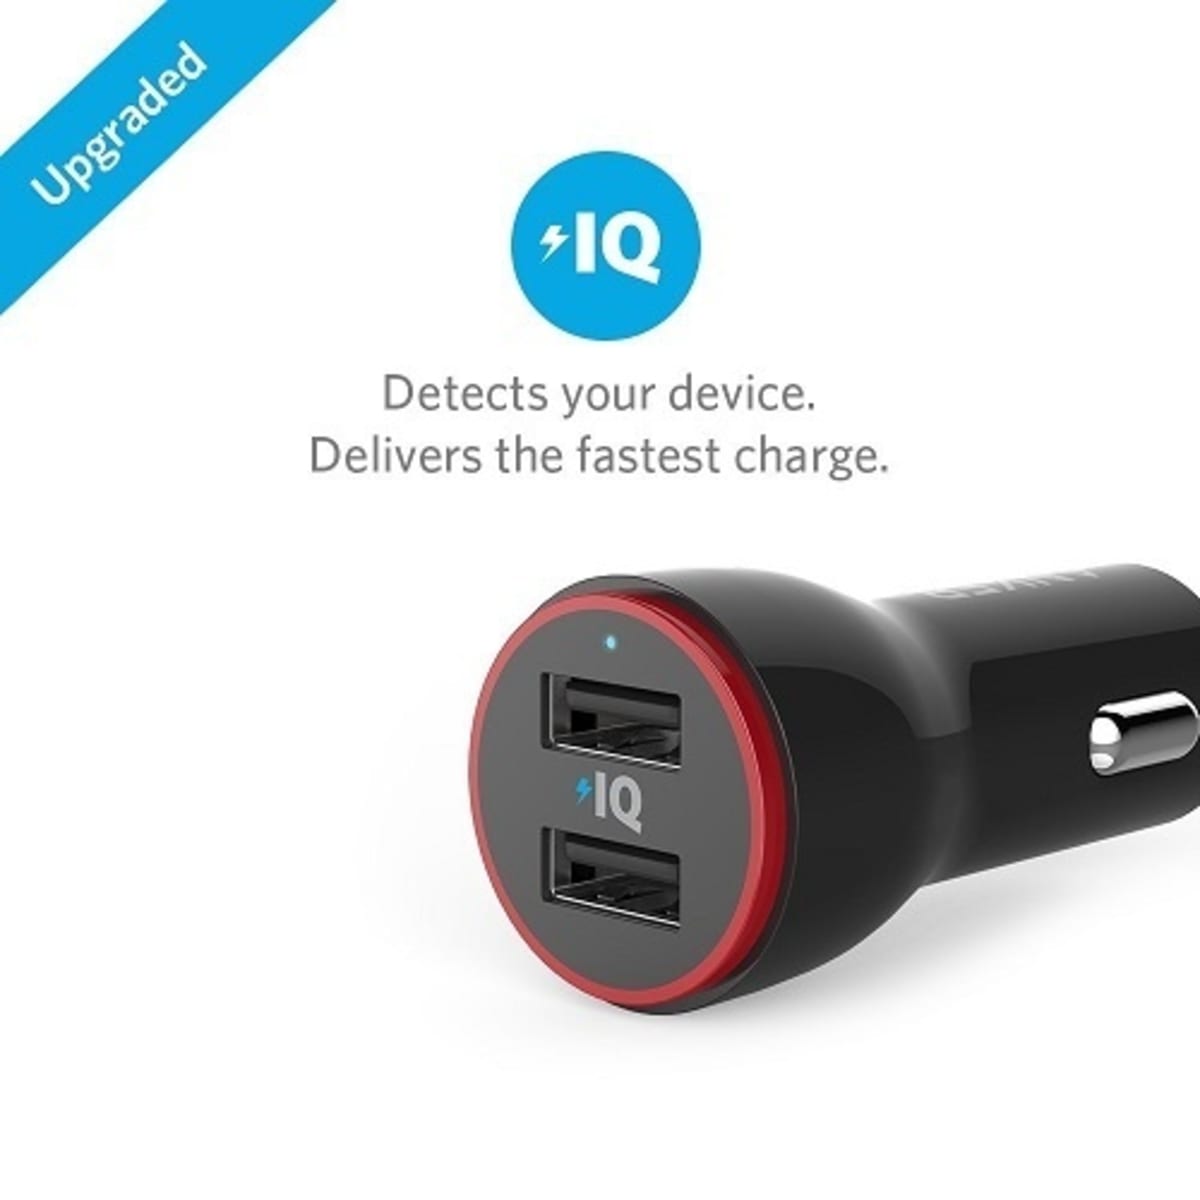 Anker PowerDrive 2. 24W Dual Port USB Car Charger + 3ft Micro USB